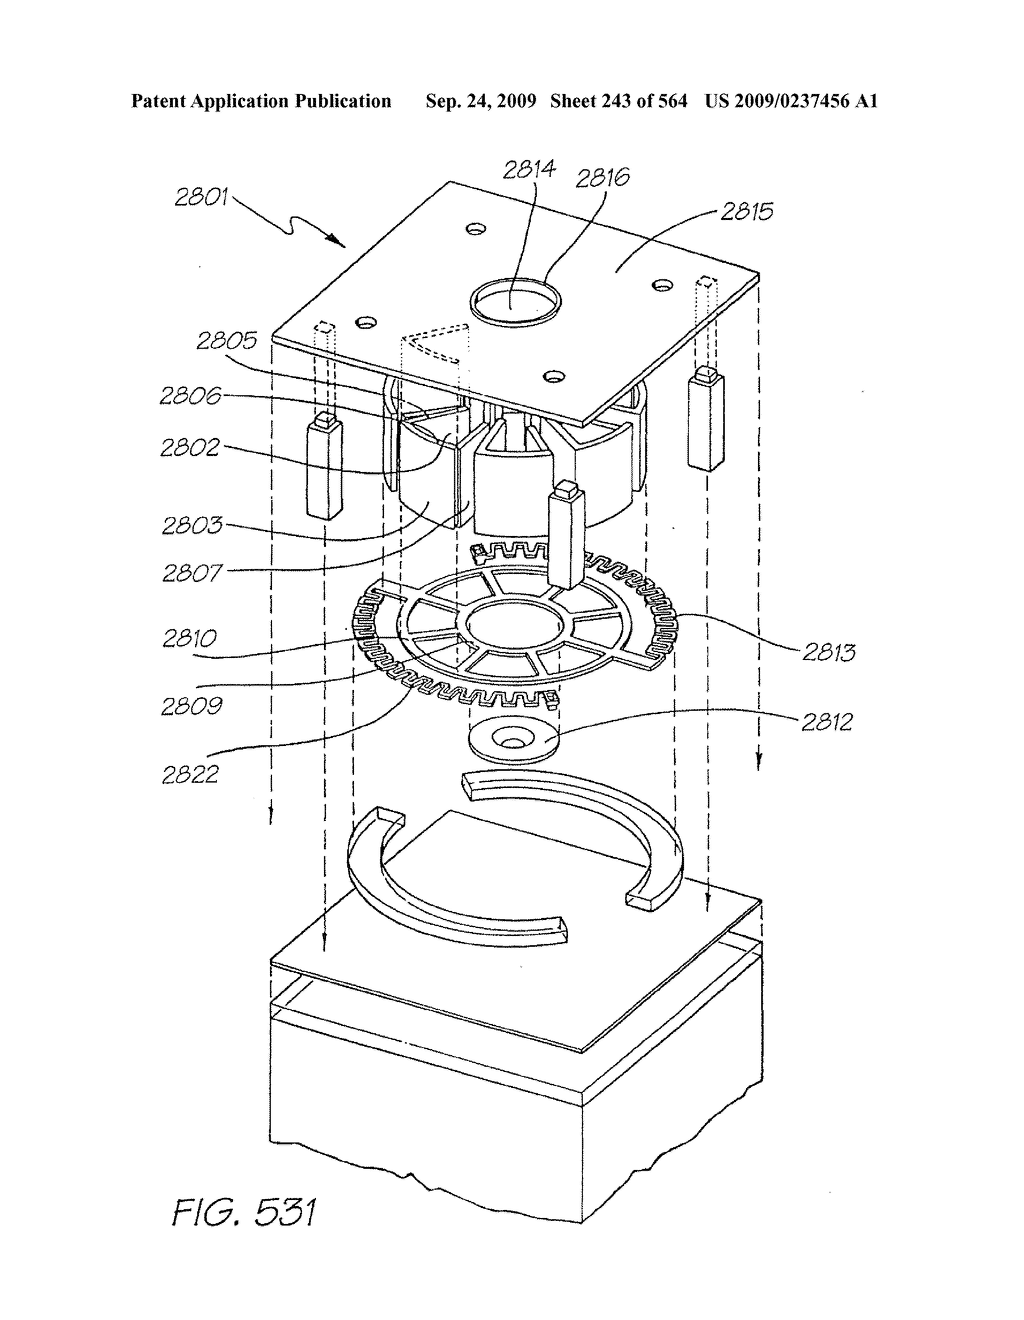 Inkjet Printhead With Paddle For Ejecting Ink From One Of Two Nozzles - diagram, schematic, and image 244